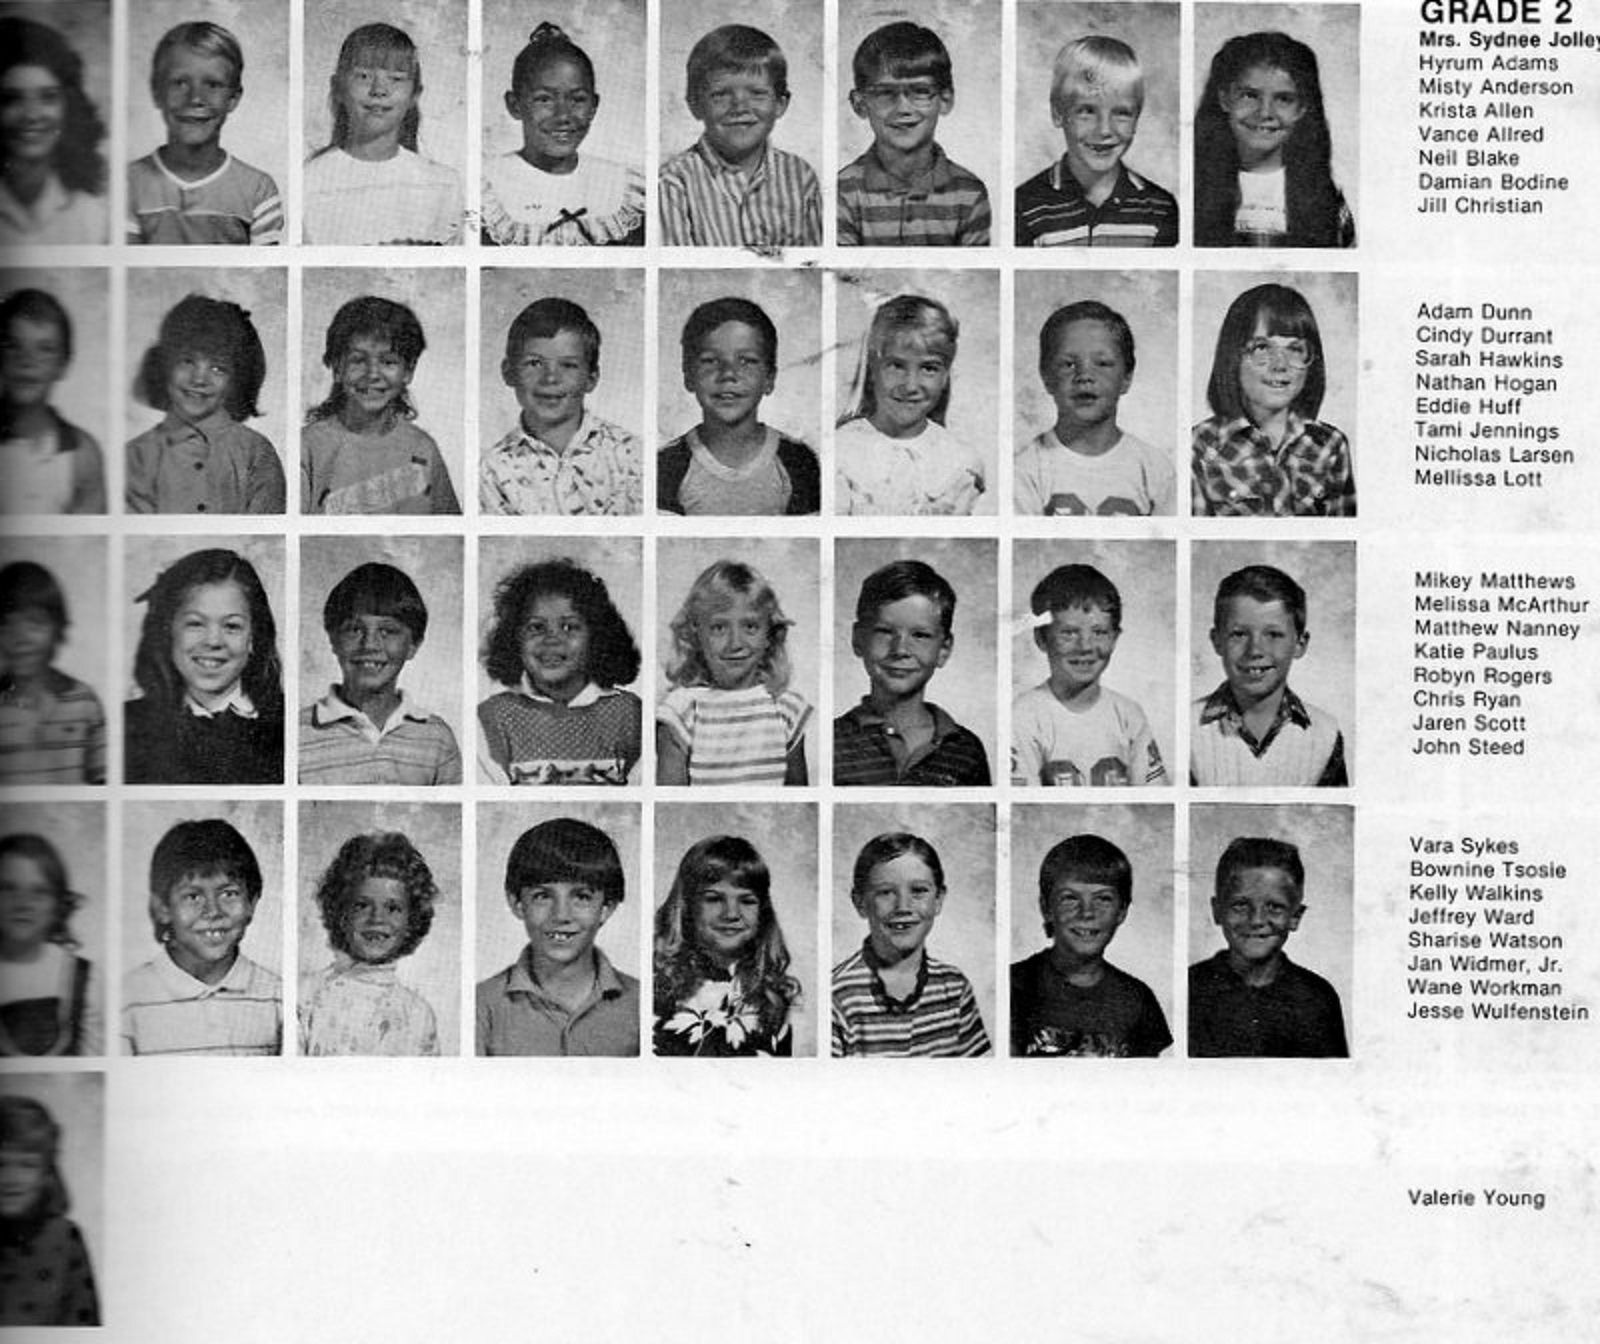 Mrs. Syndee Jolley's 1986-1987 second grade class at East Elementary School